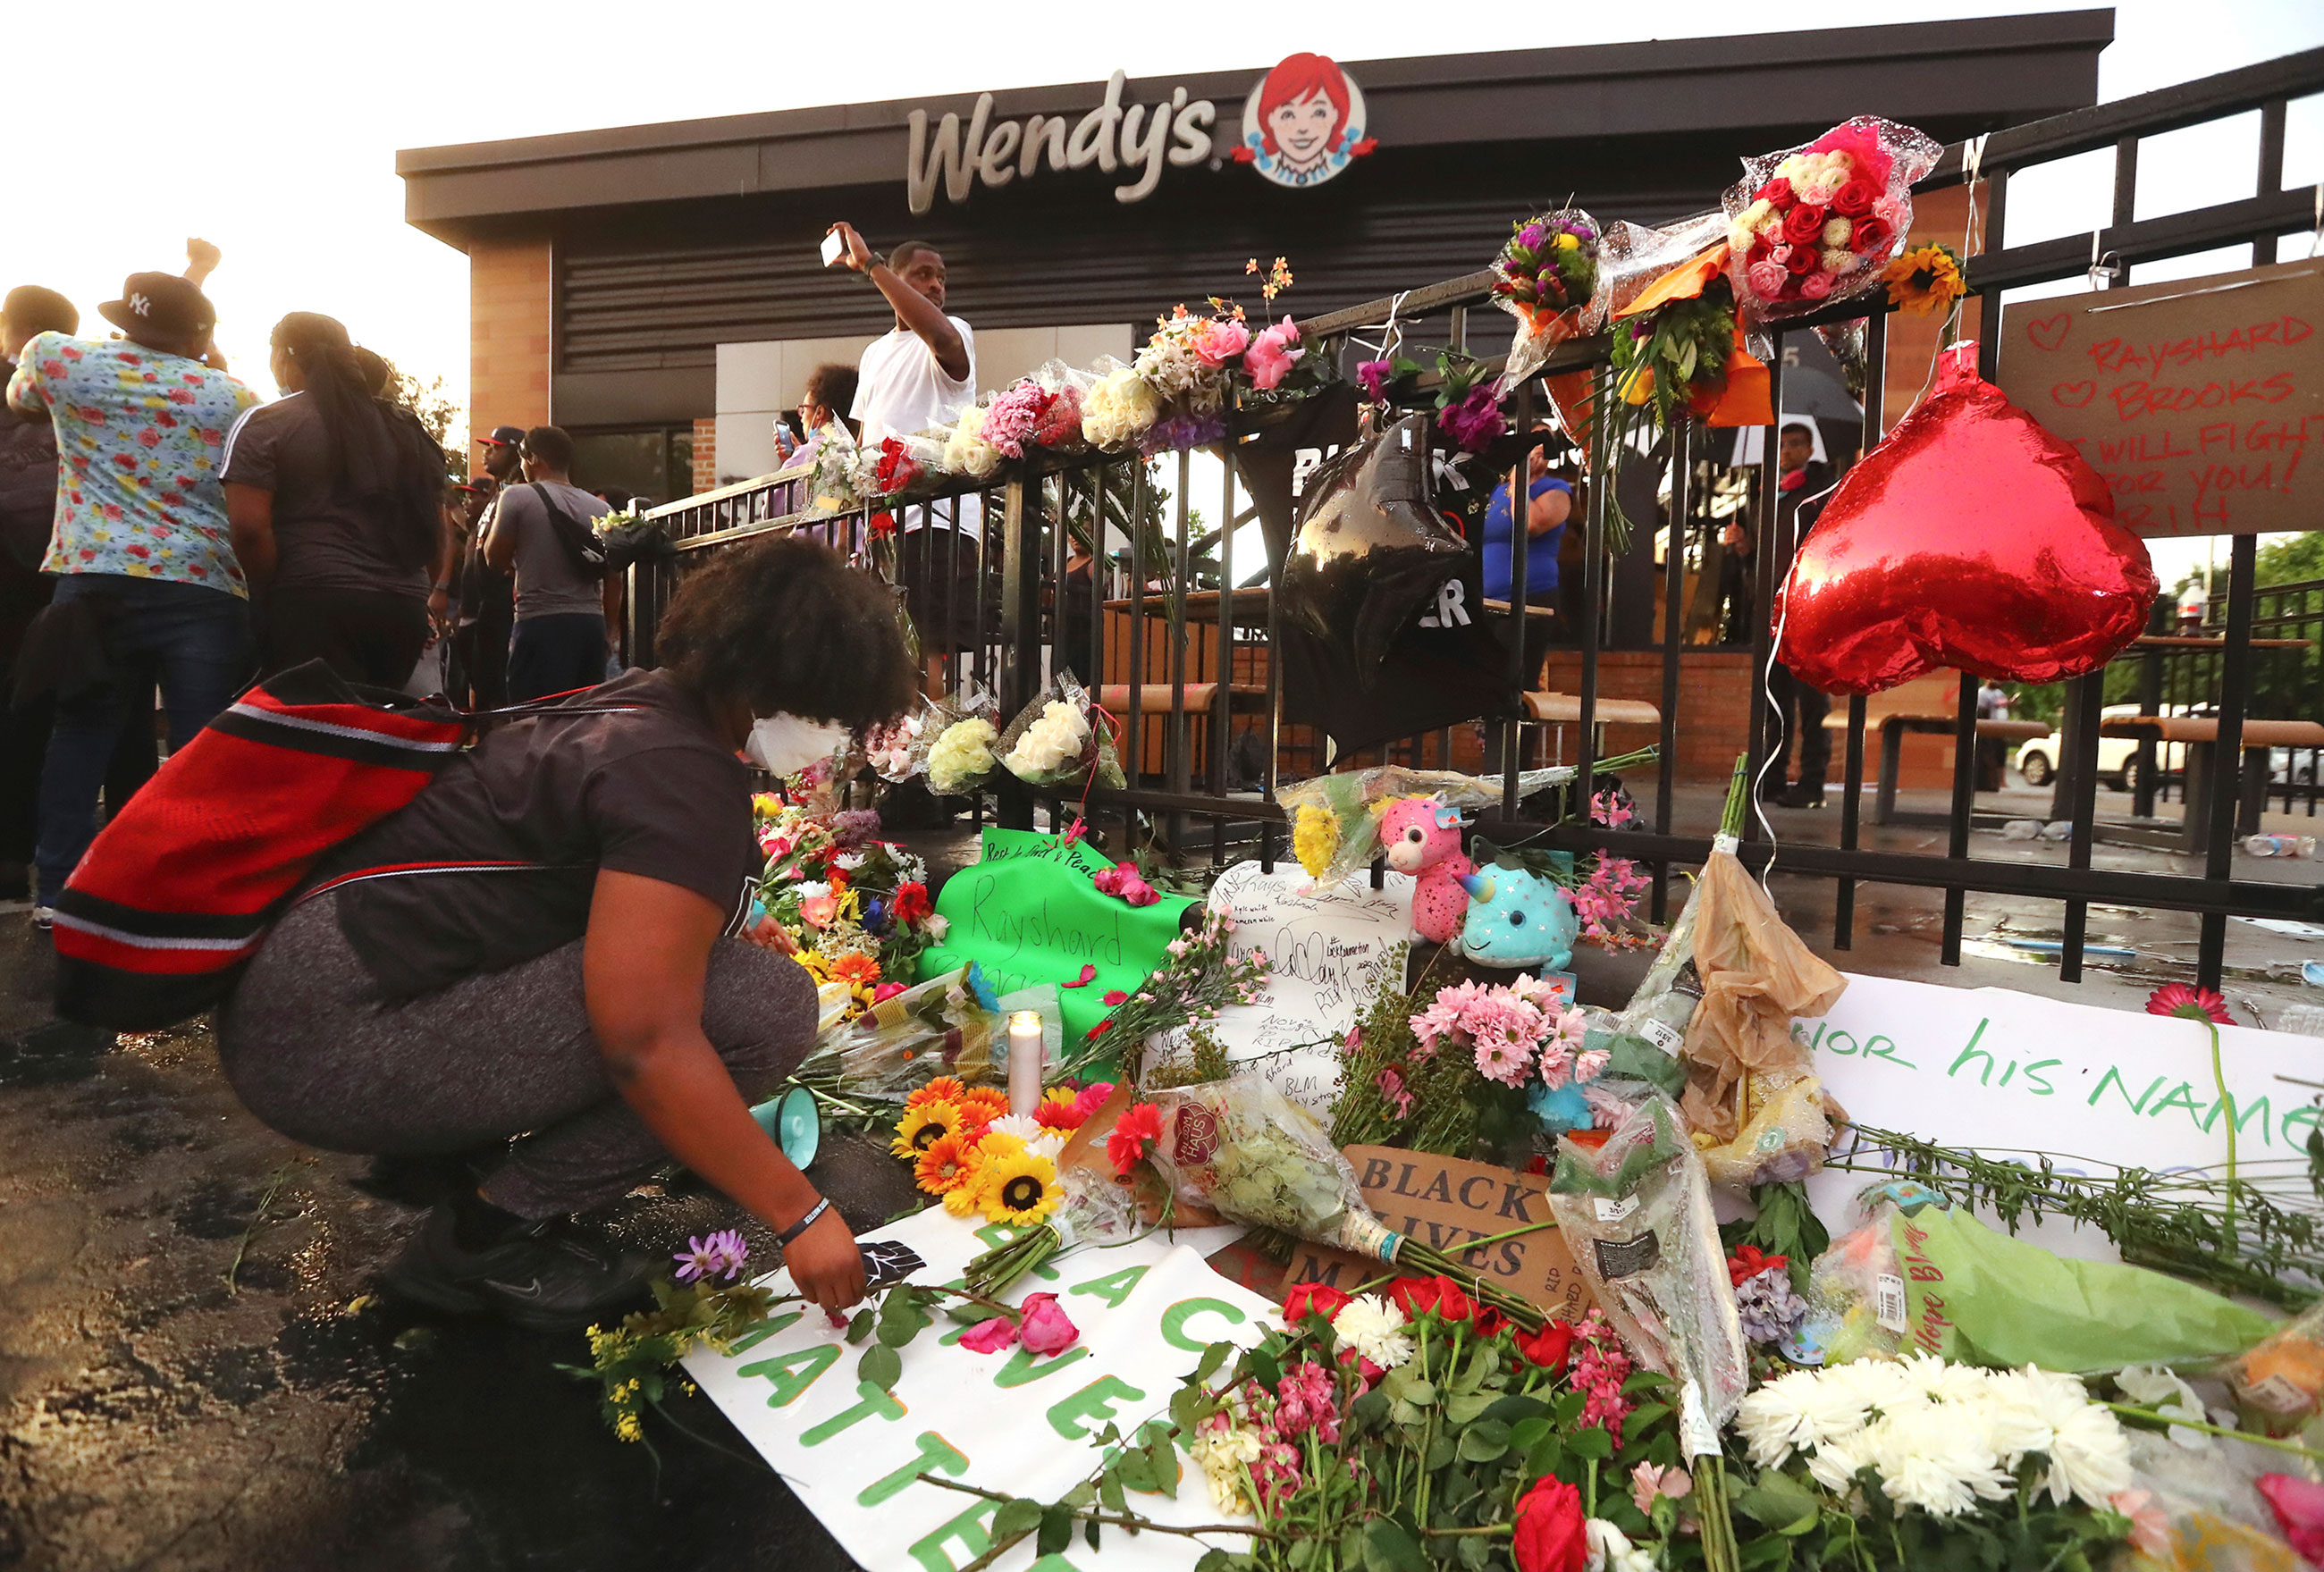 People build a memorial at a Wendy's in Atlanta on Sunday, where Rayshard Brooks was shot and killed during a confrontation with police on June 12.